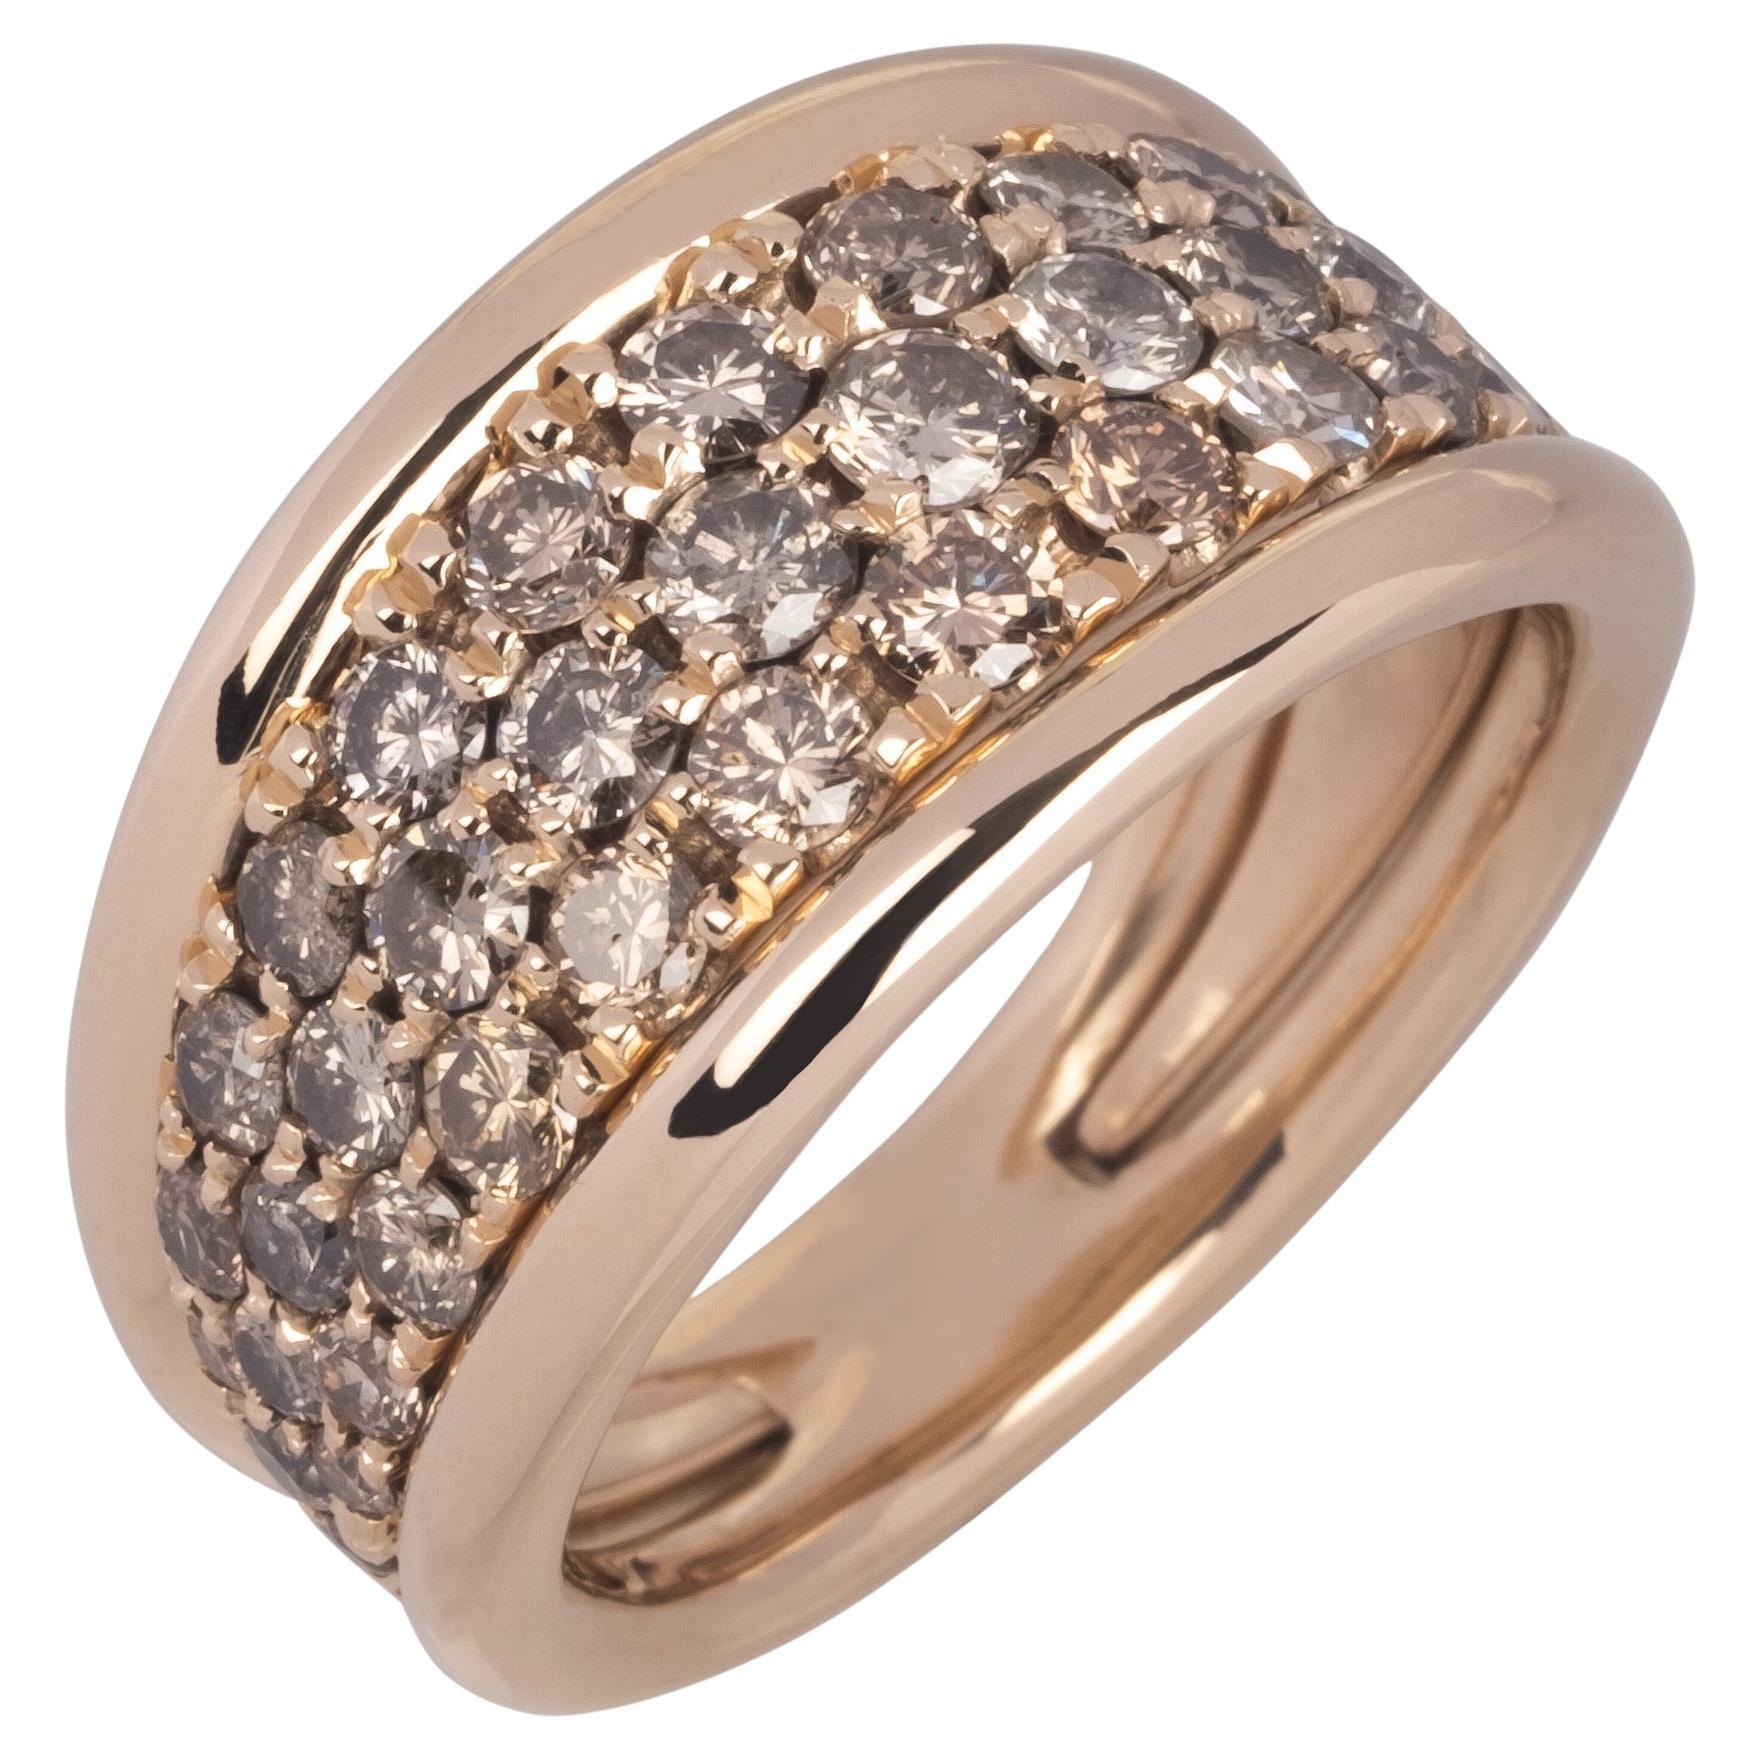 2.2 carats Champagne Diamonds in Yellow Gold Ring For Sale